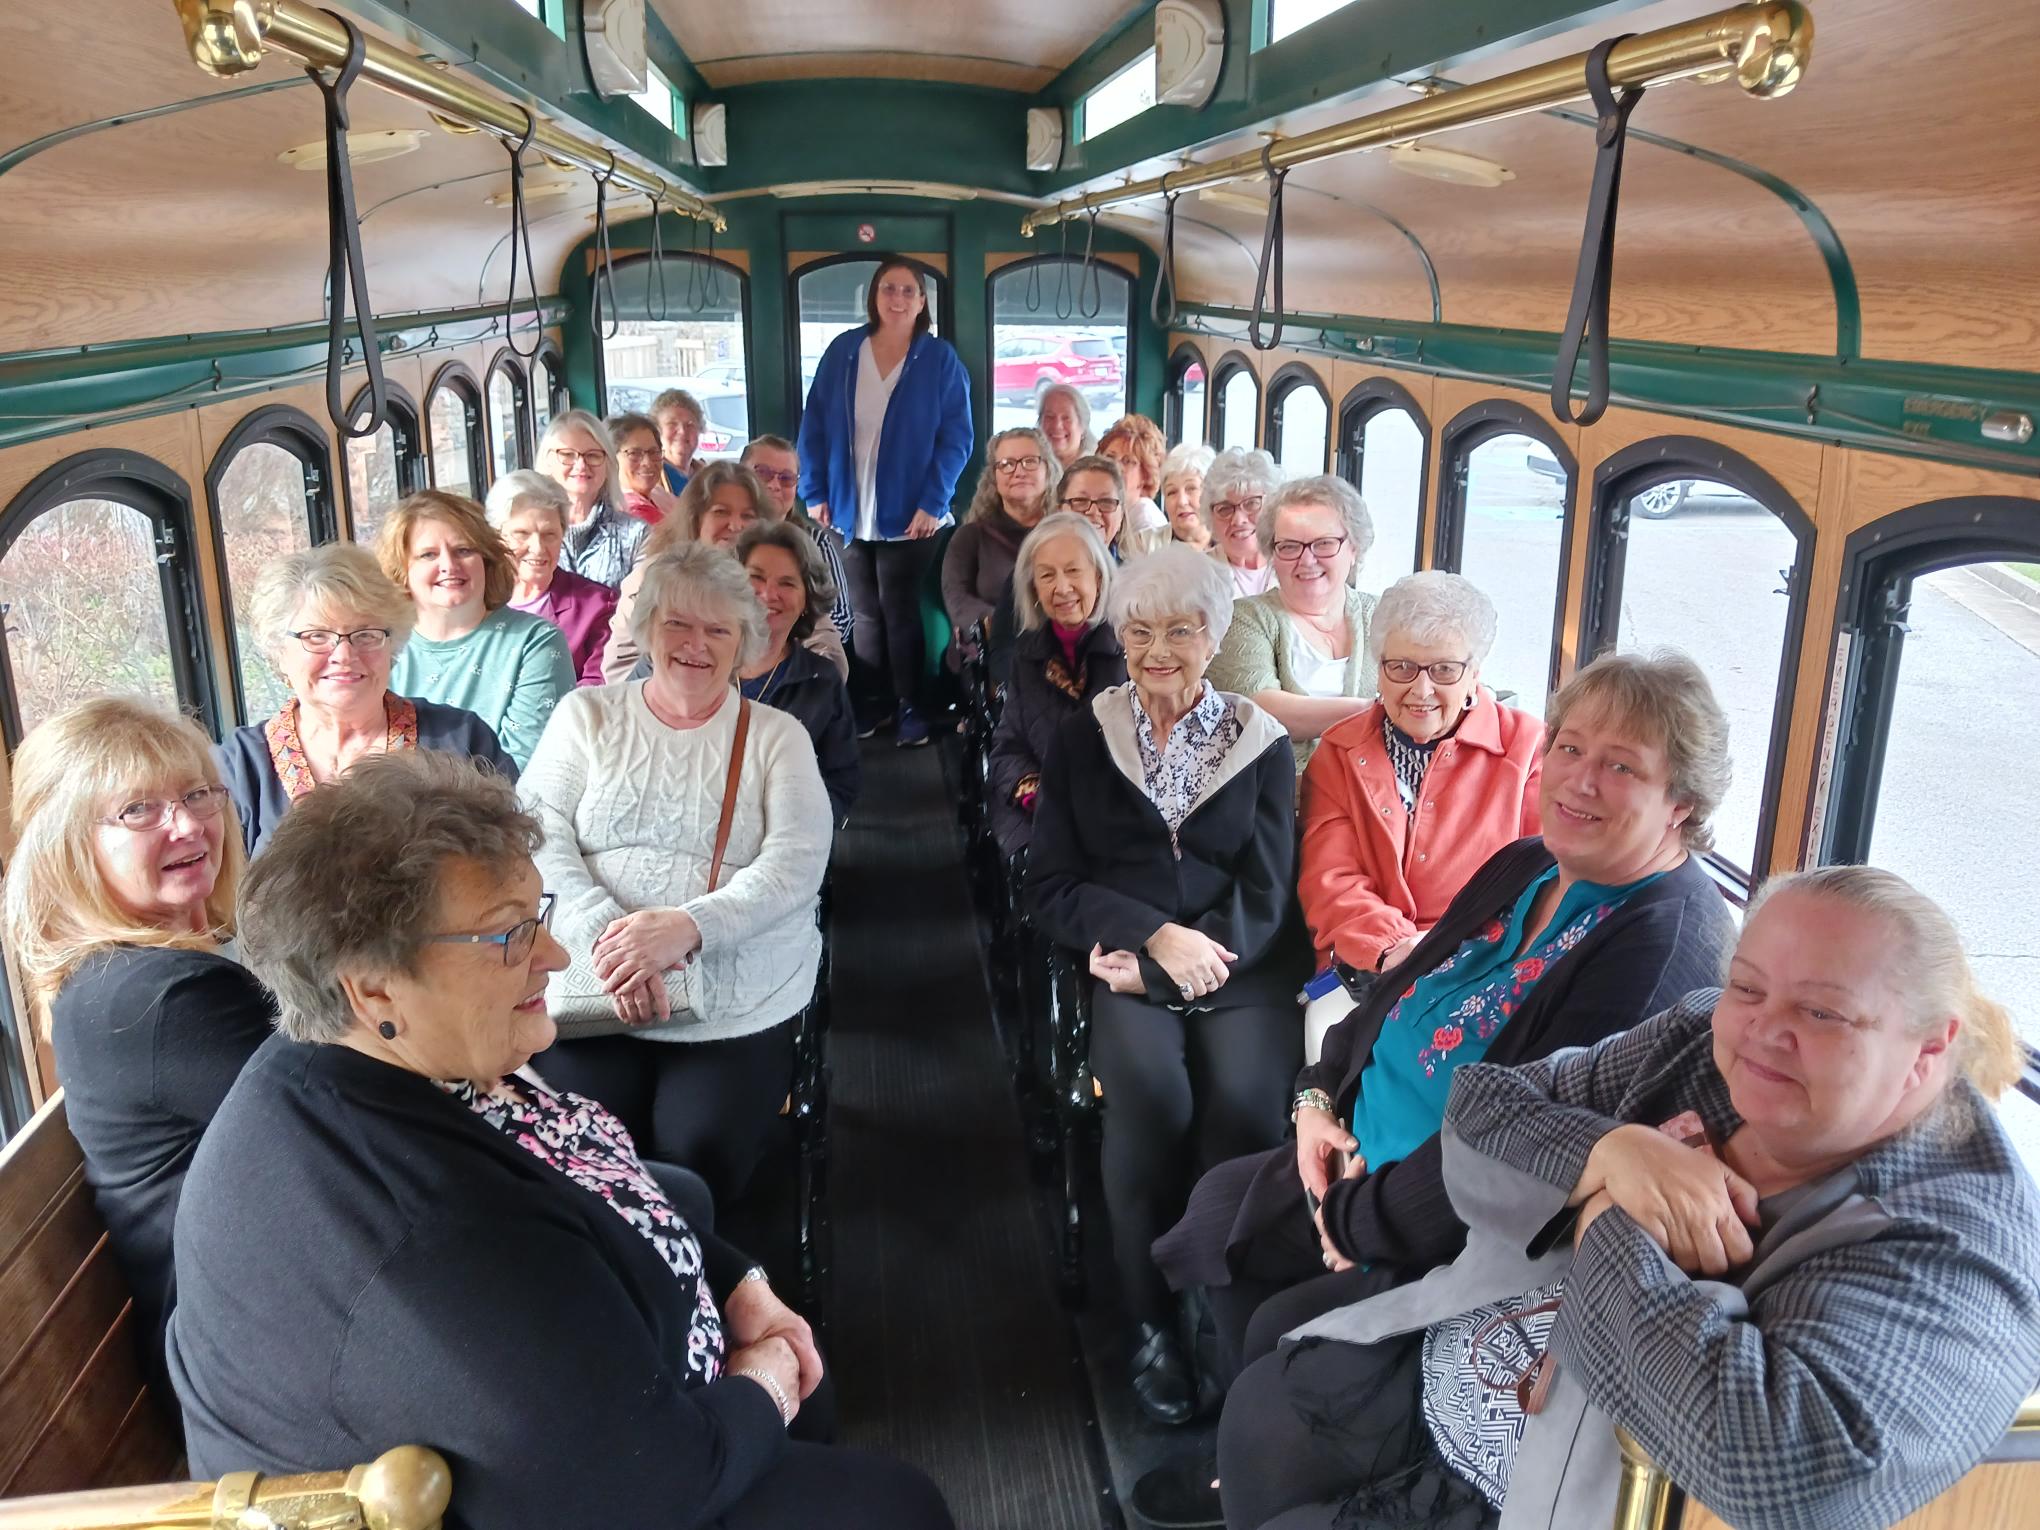 On March 2, the group participated in an off-site tour of Maysville sights.